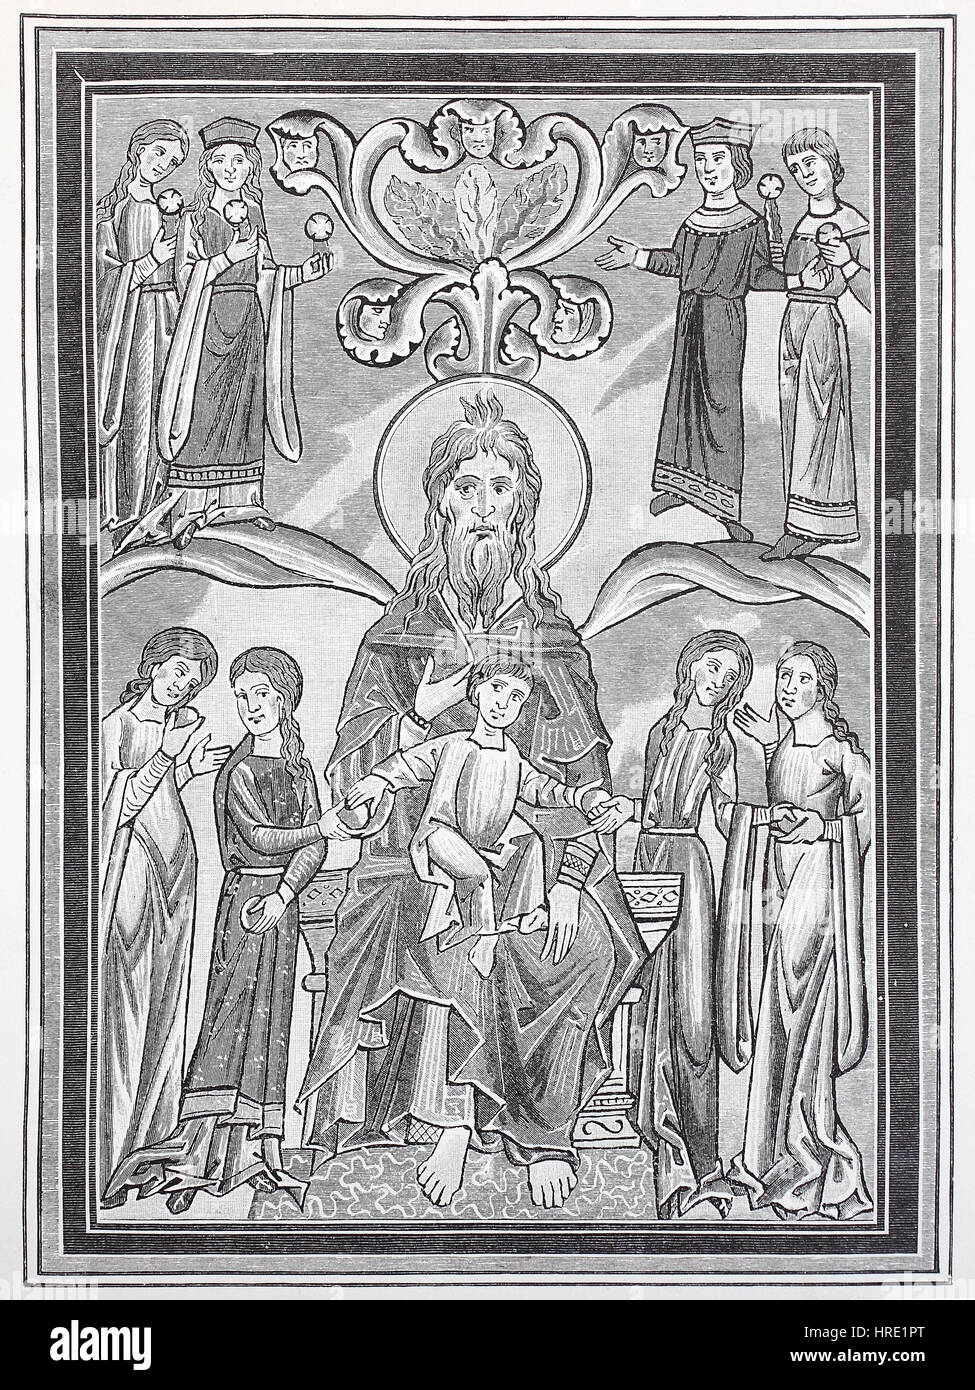 Miniature in the Psalterium of Landgrave Hermann of Thuringia, depicting the biblical promise to the righteous, Psalm 92, Germany, reproduction of an woodcut from the 19th century, 1885 Stock Photo